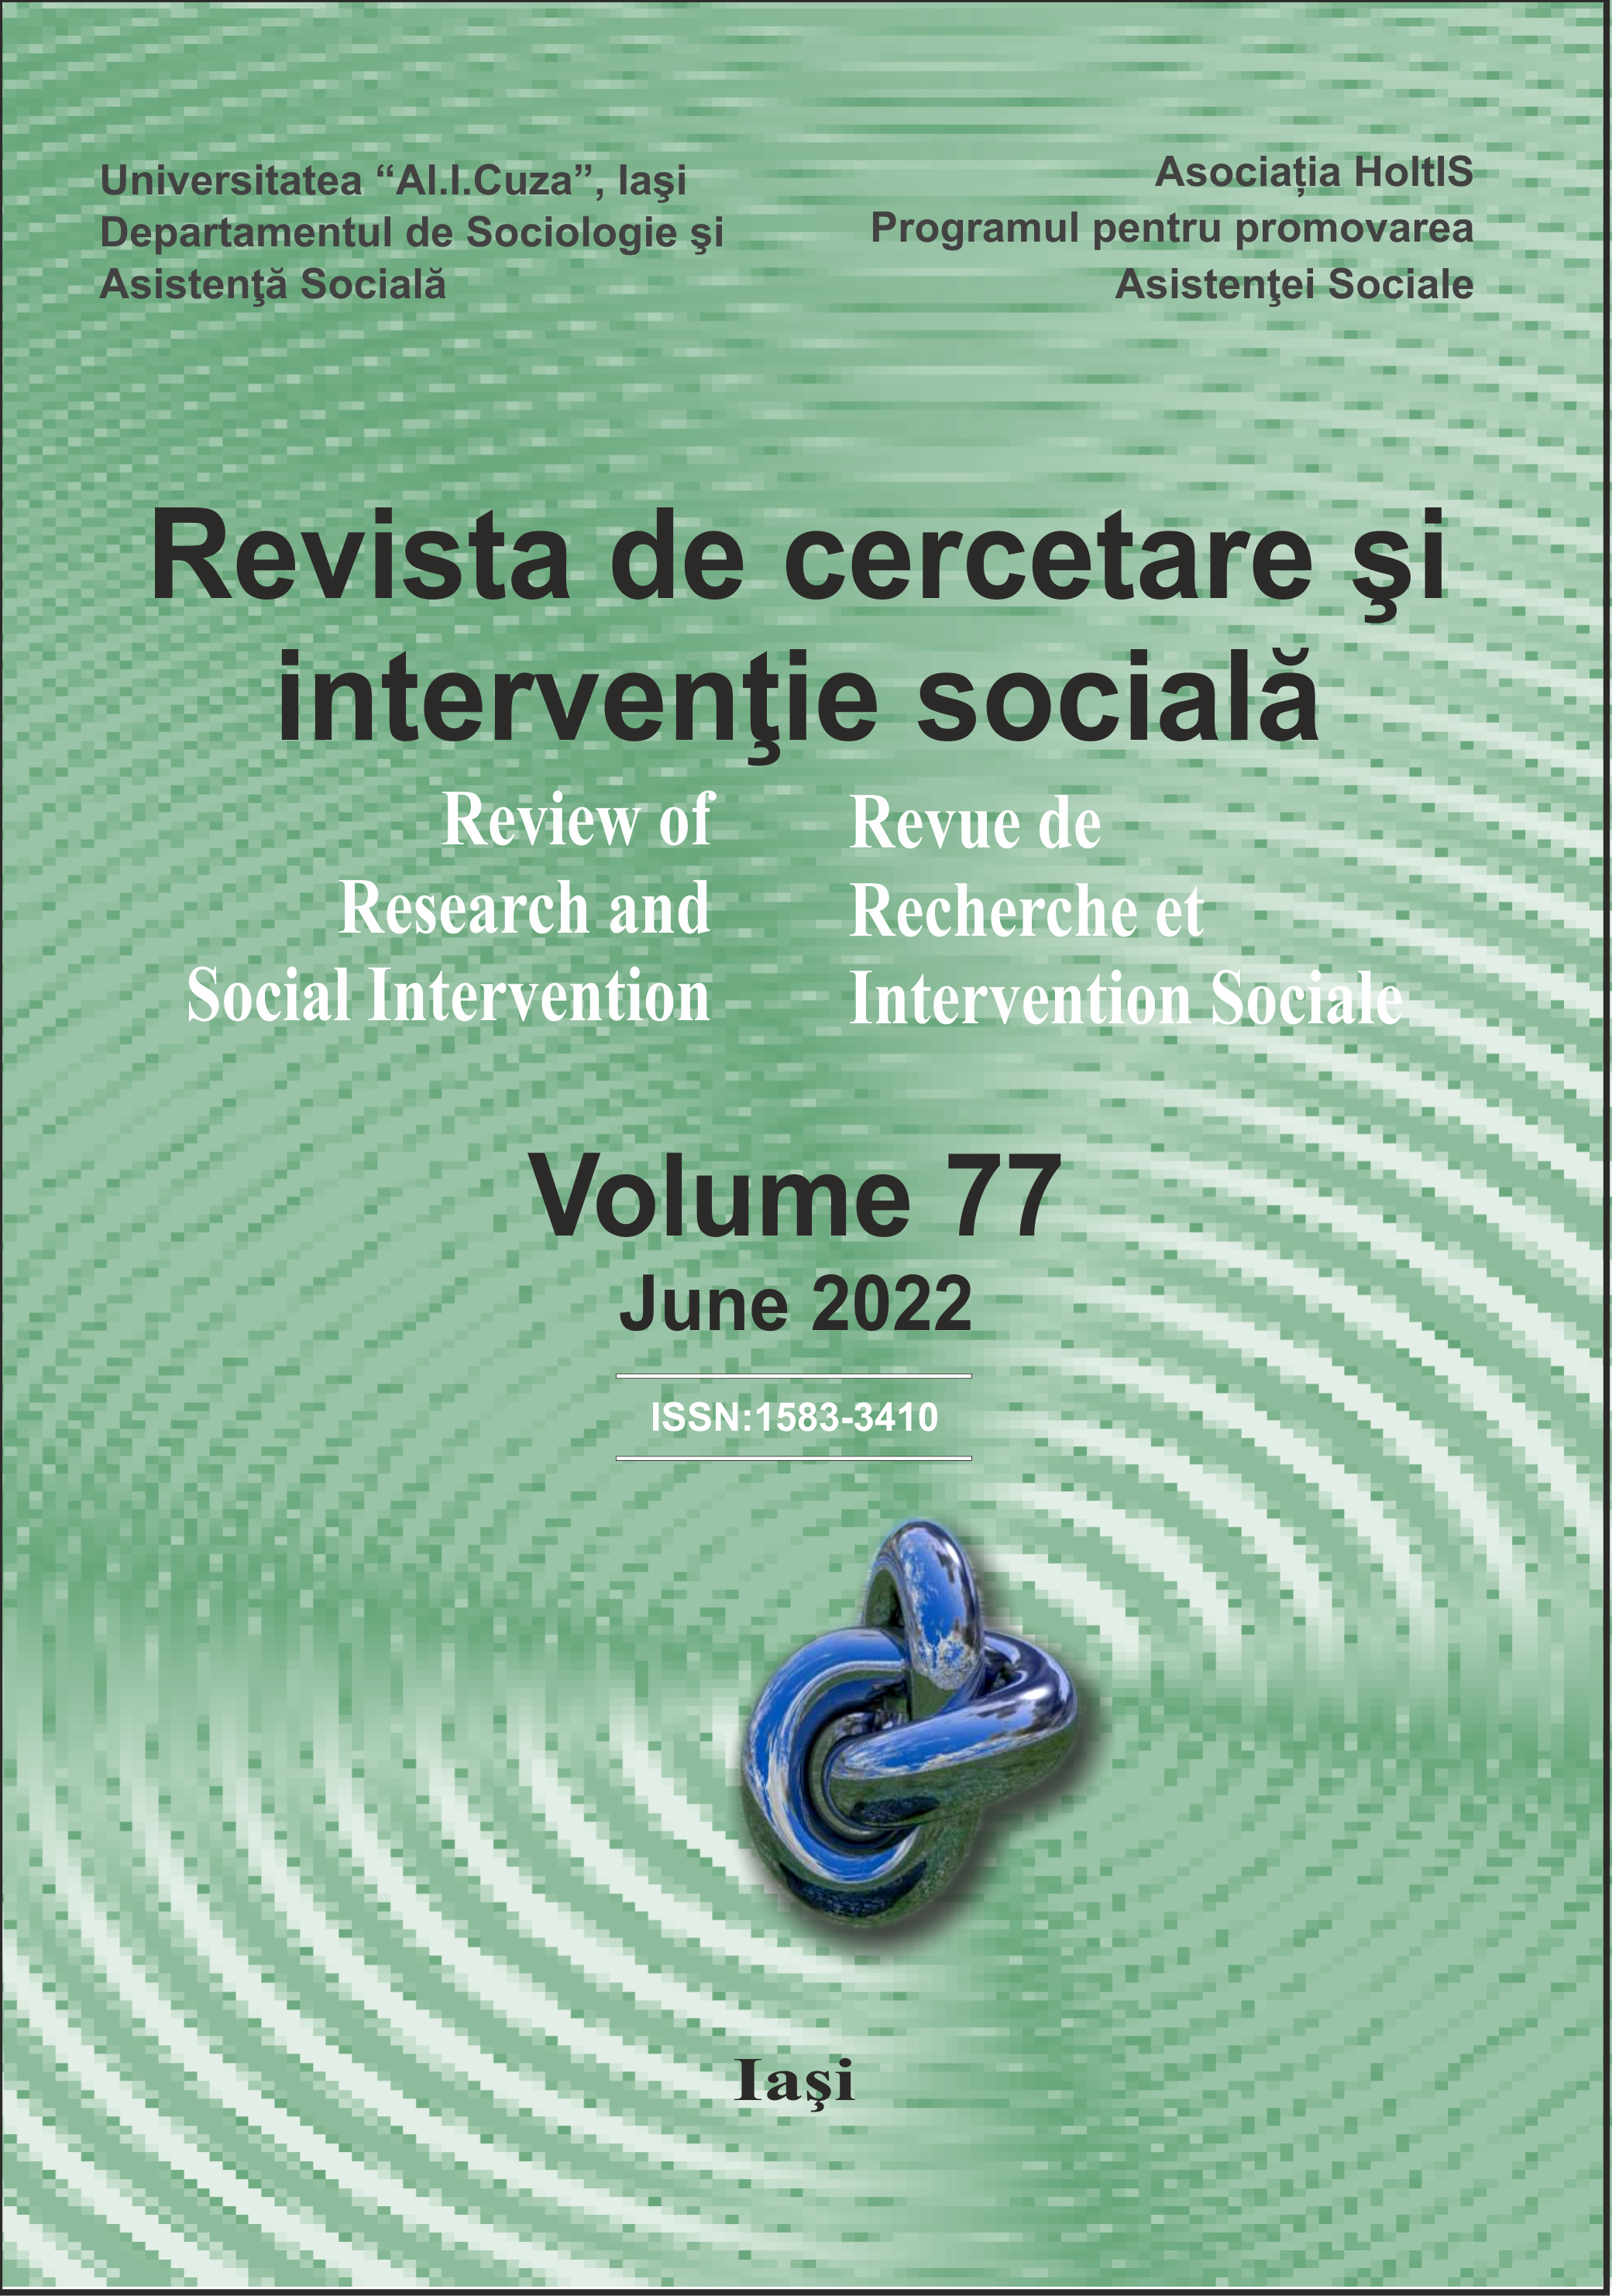 Integrative Elderly Care Model as a Part of a Changing Long-Term Care and Welfare State in Slovakia